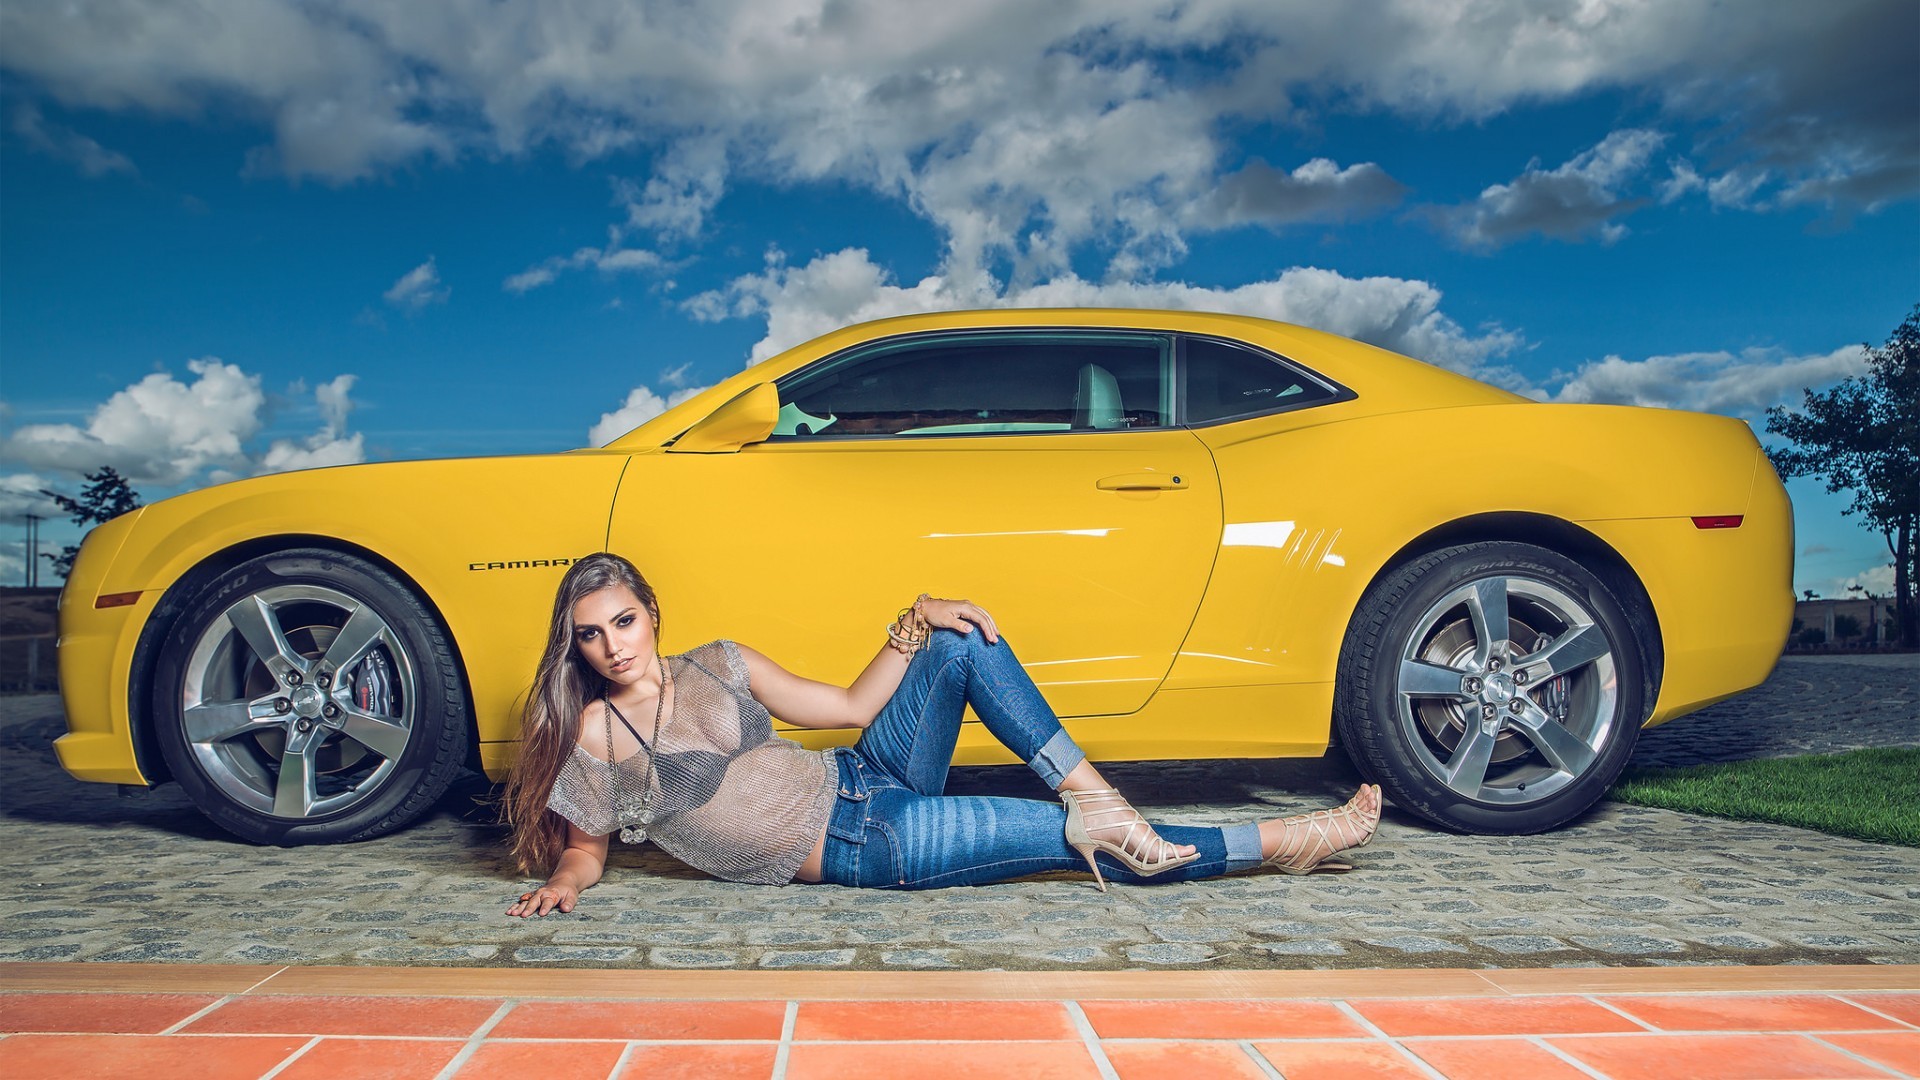 People 1920x1080 women Chevrolet Camaro women with cars Chevrolet yellow cars car vehicle heels model boobs bra see-through clothing looking at viewer long hair jeans black bras